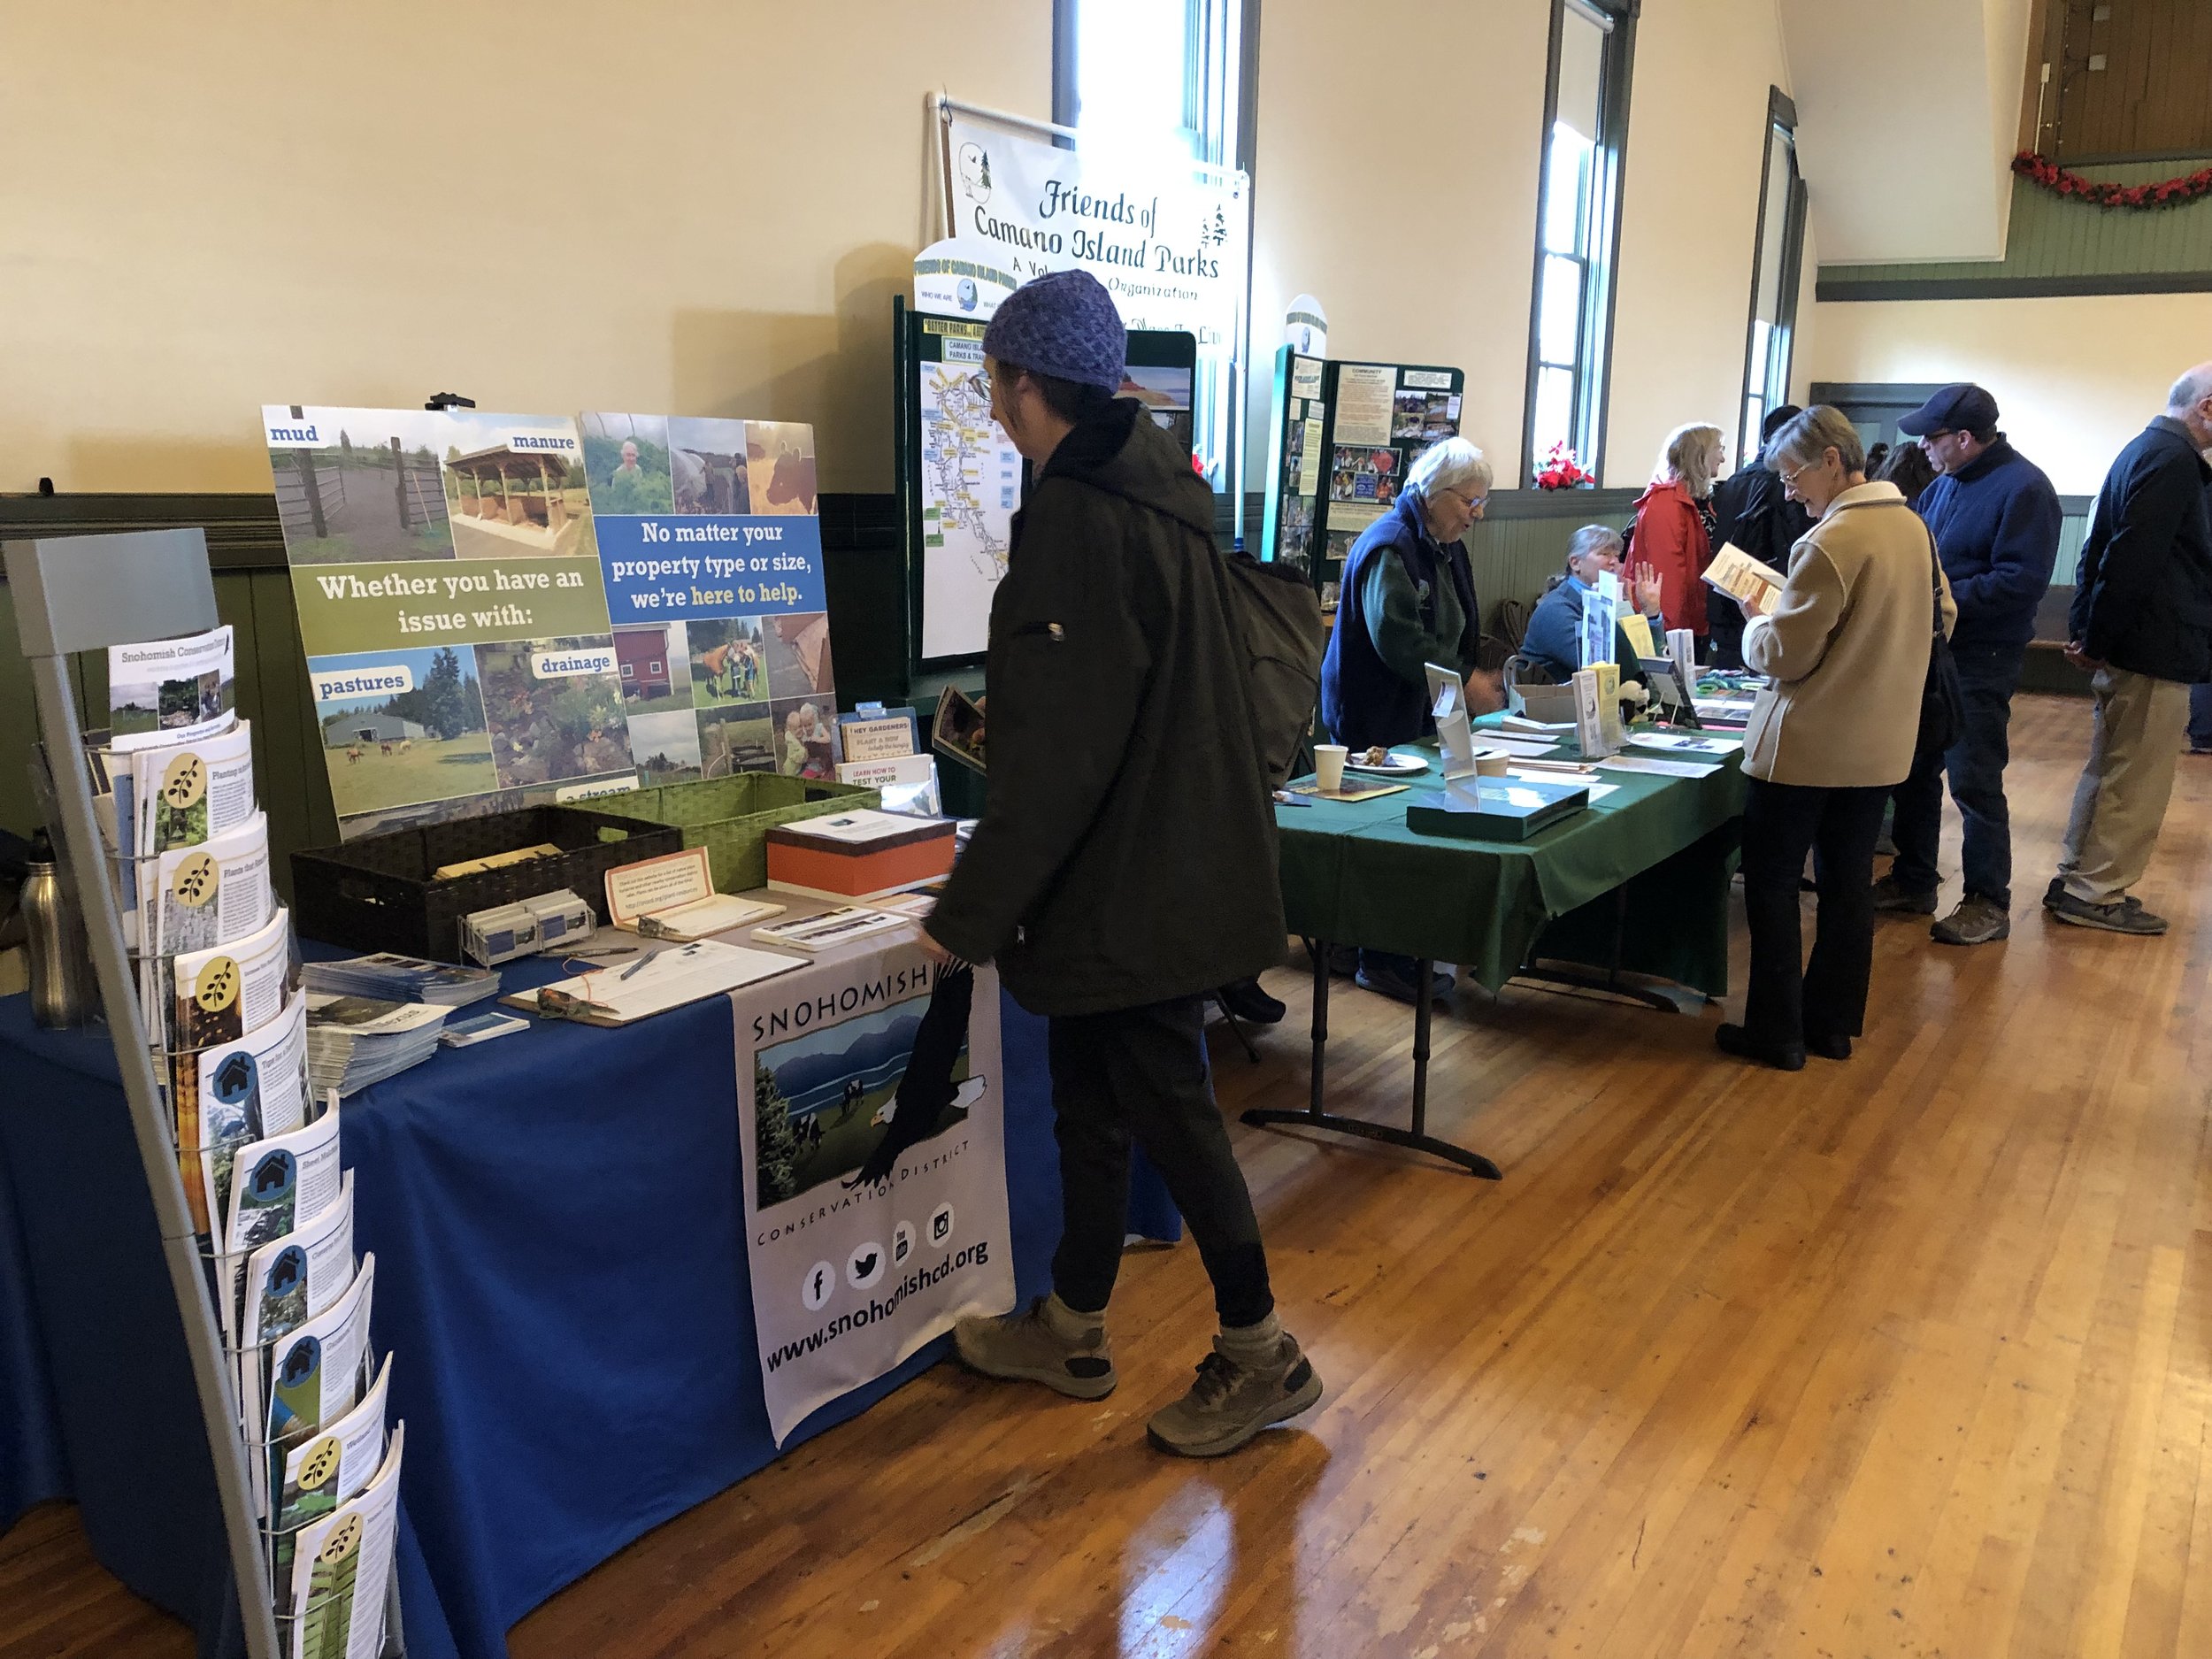 FOCIP and Camano Wildlife Habitat Project's tables were next to SCD's table